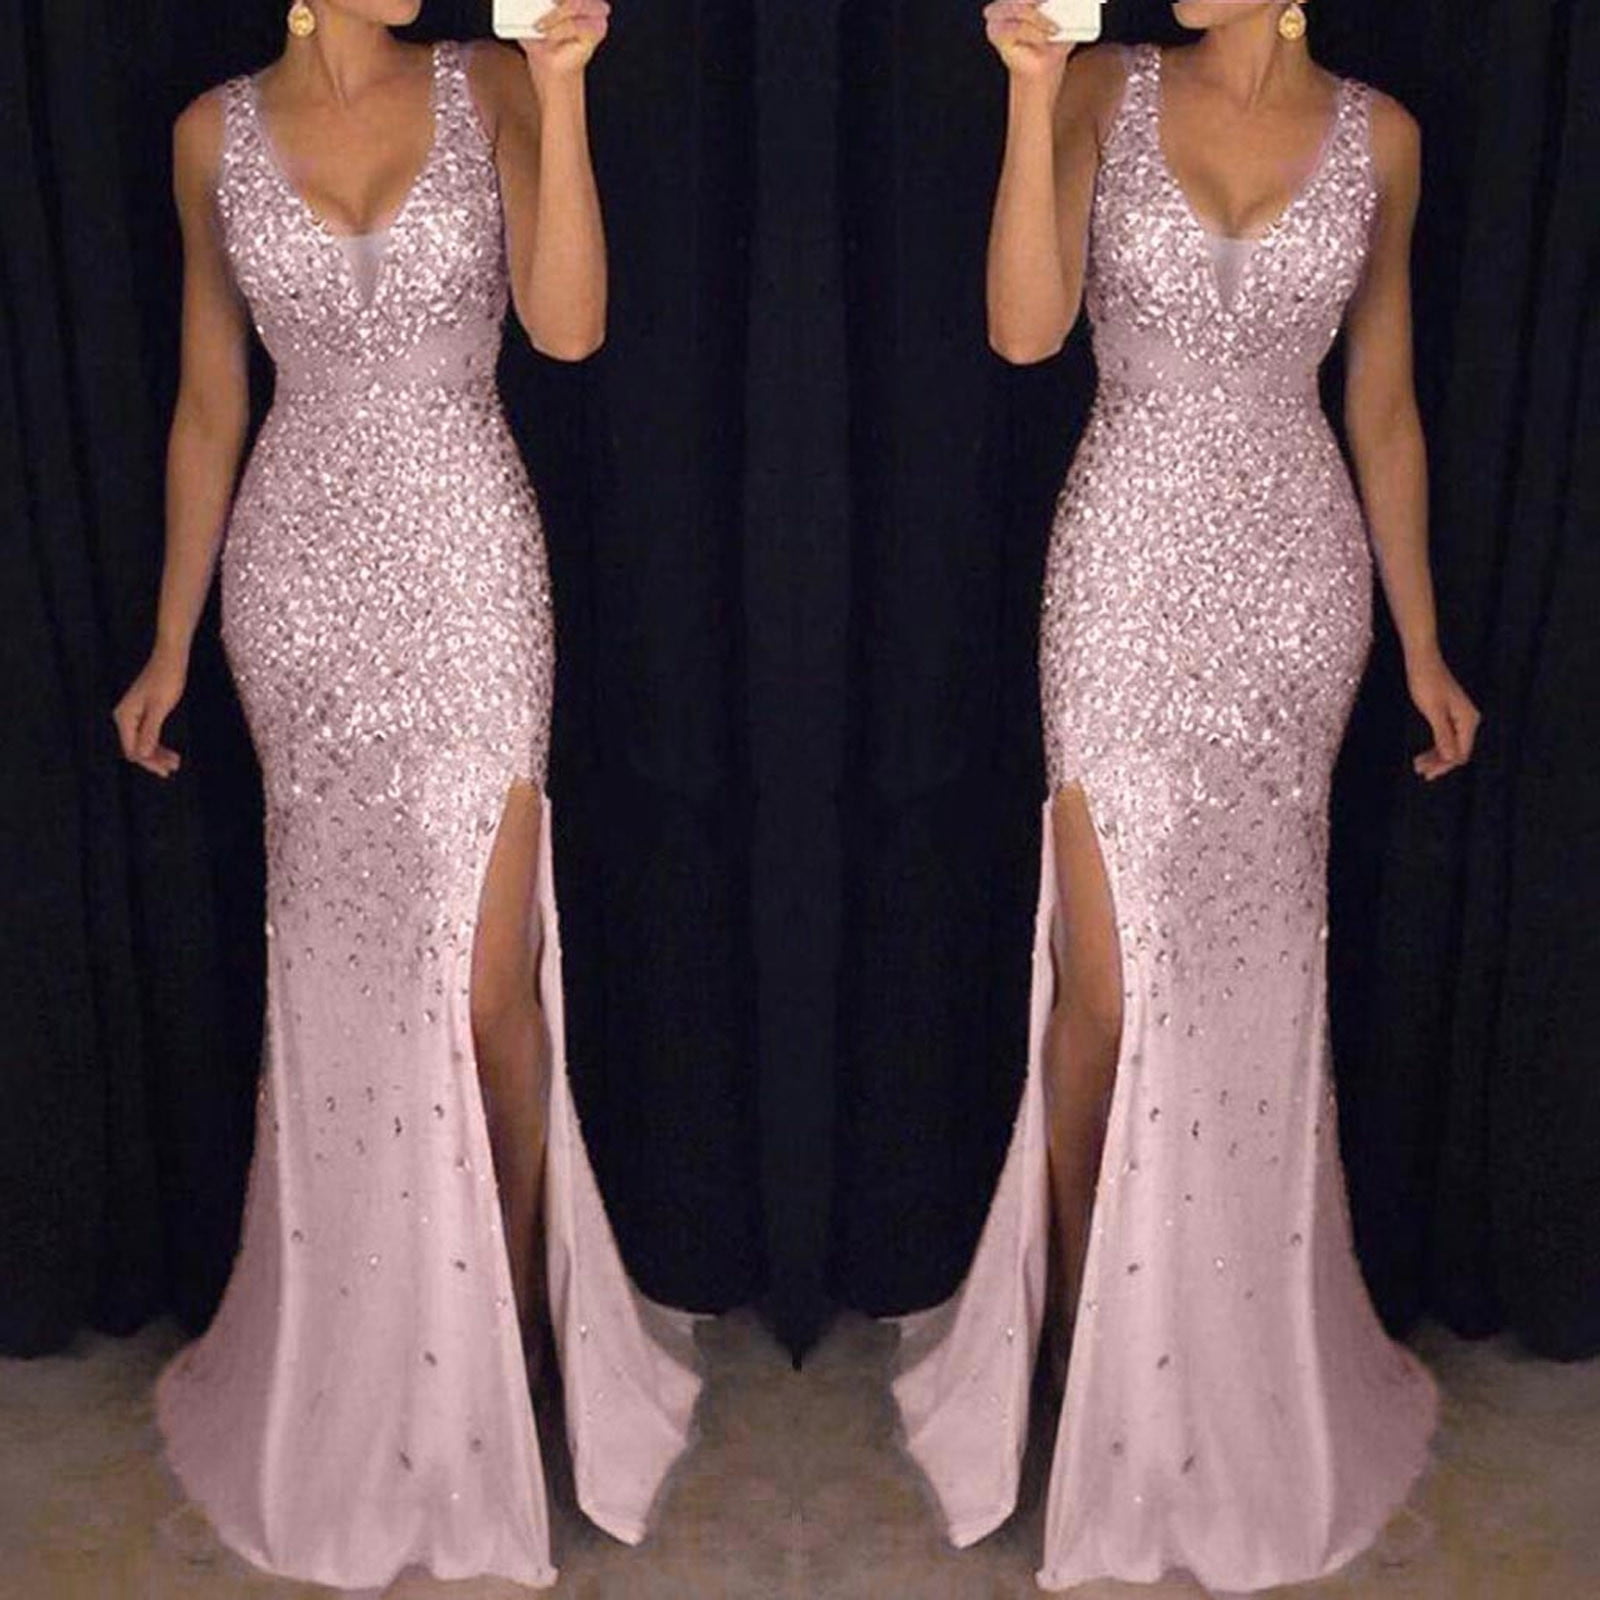 IDALL Wedding Guest Dresses,Prom Dresses Women Sequin Prom Party Ball ...